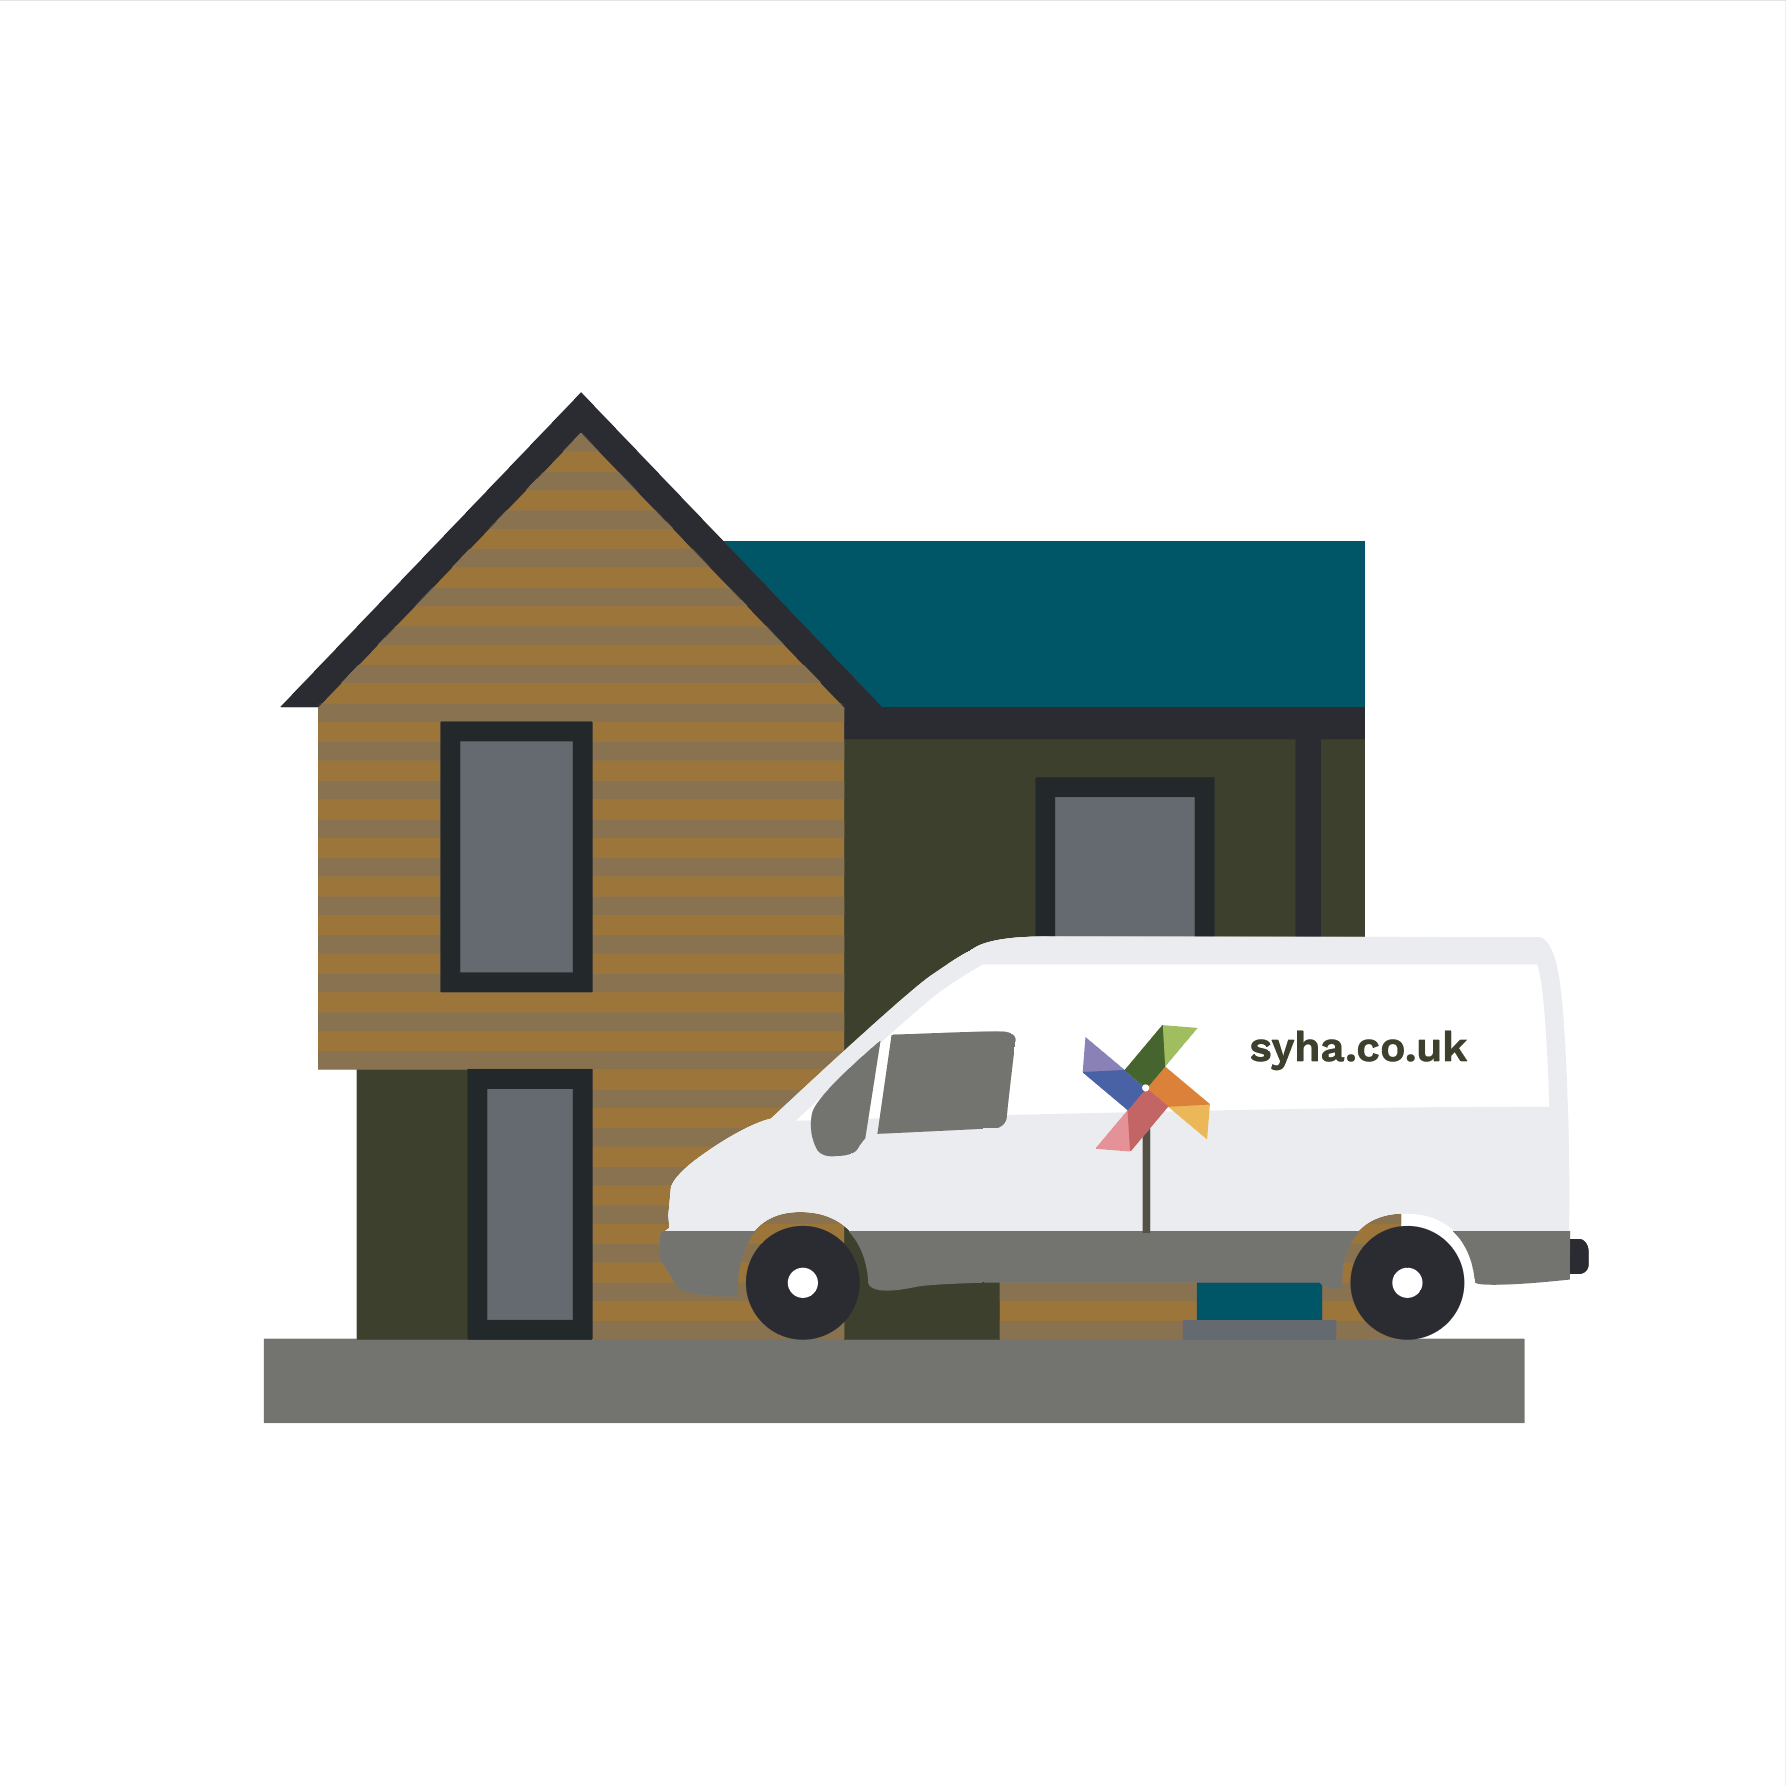 An illustration of an SYHA van in front of a house.